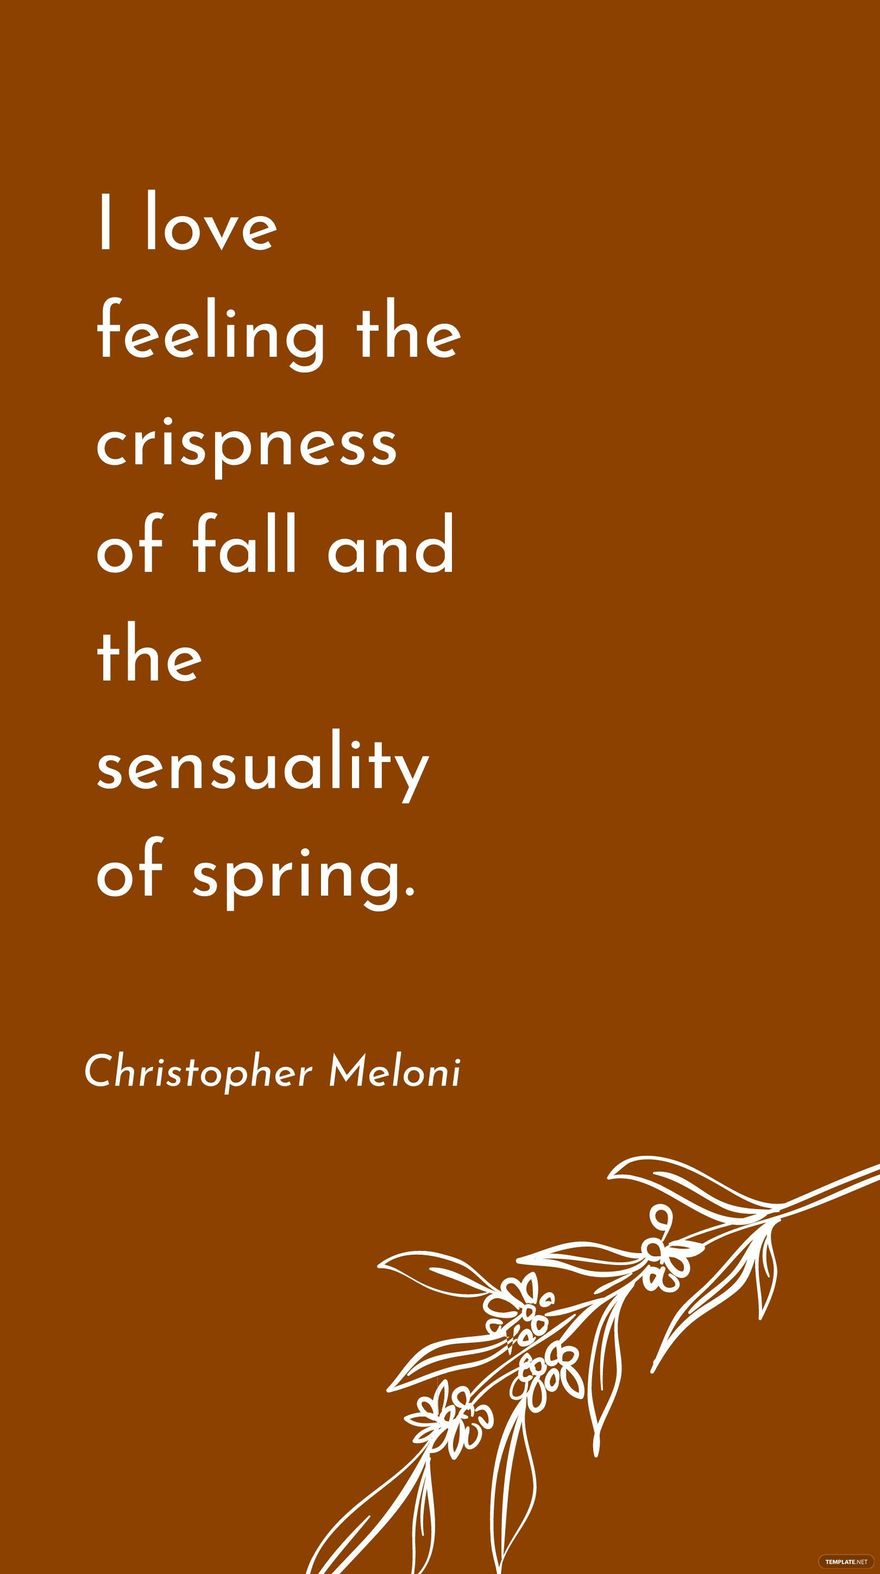 Christopher Meloni - I love feeling the crispness of fall and the sensuality of spring. in JPG